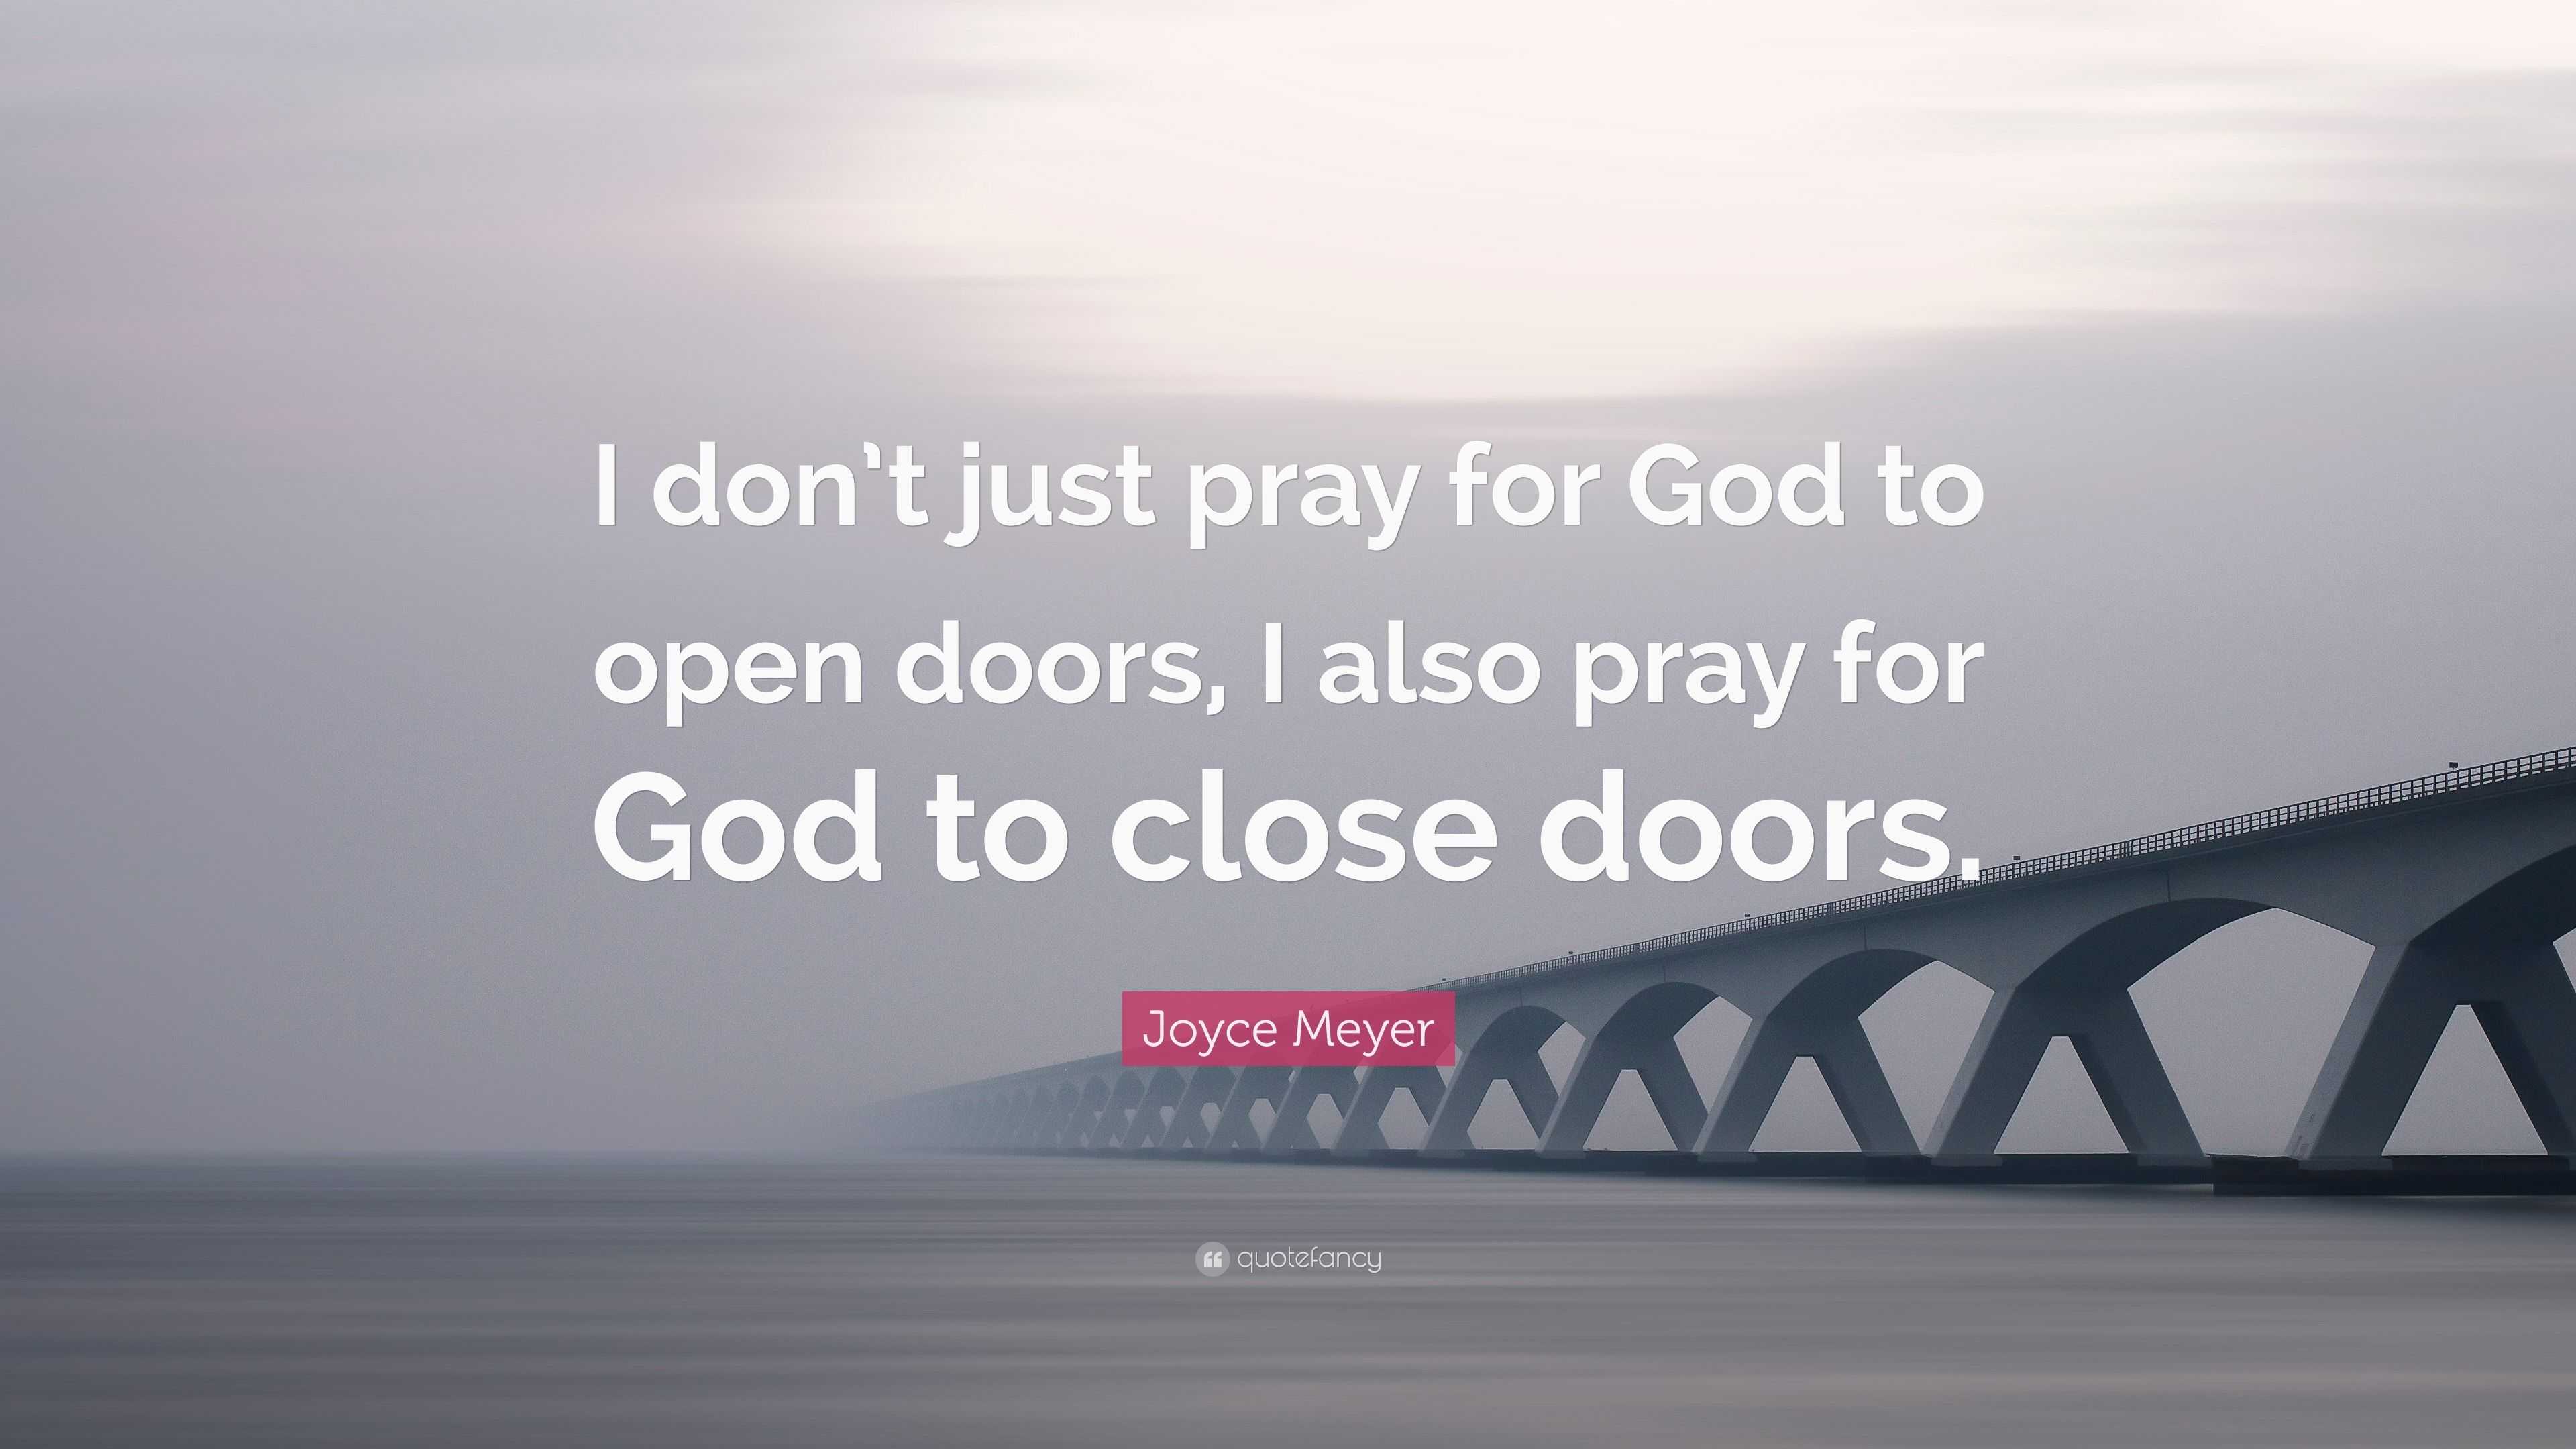 Joyce Meyer Quote: “I don’t just pray for God to open doors, I also ...